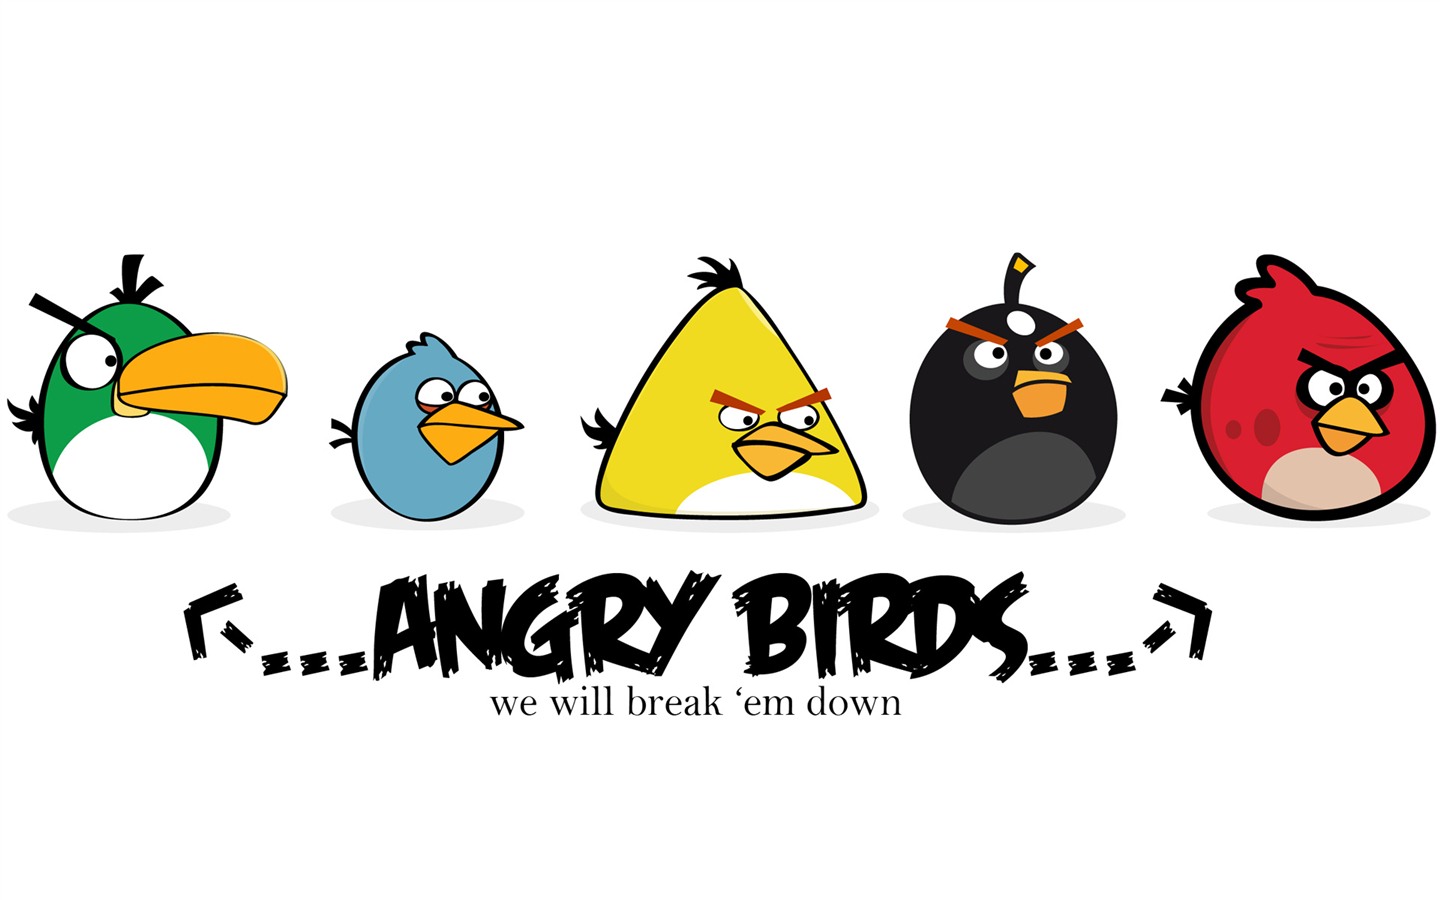 Angry Birds Game Wallpapers #2 - 1440x900